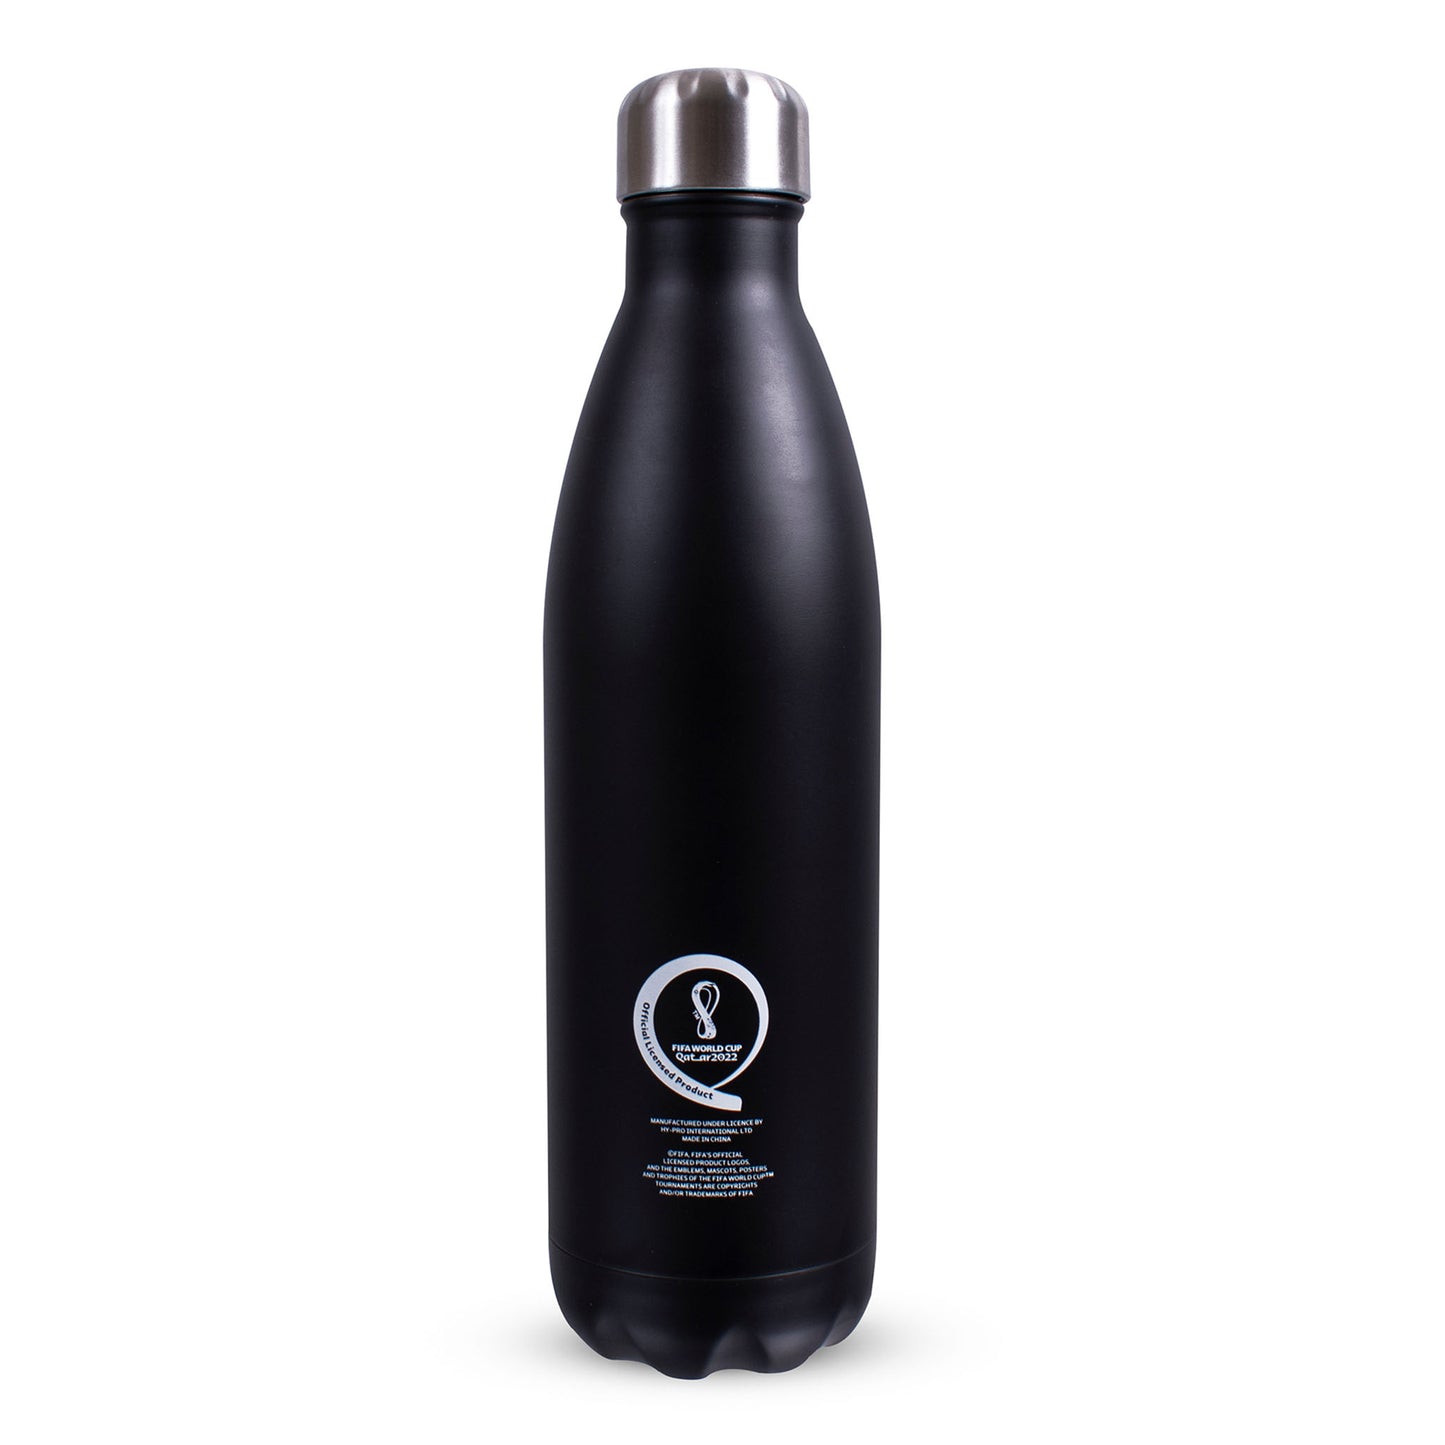 FIFA Qatar World Cup 2022 500ml Stainless Steel Thermal Water Bottle